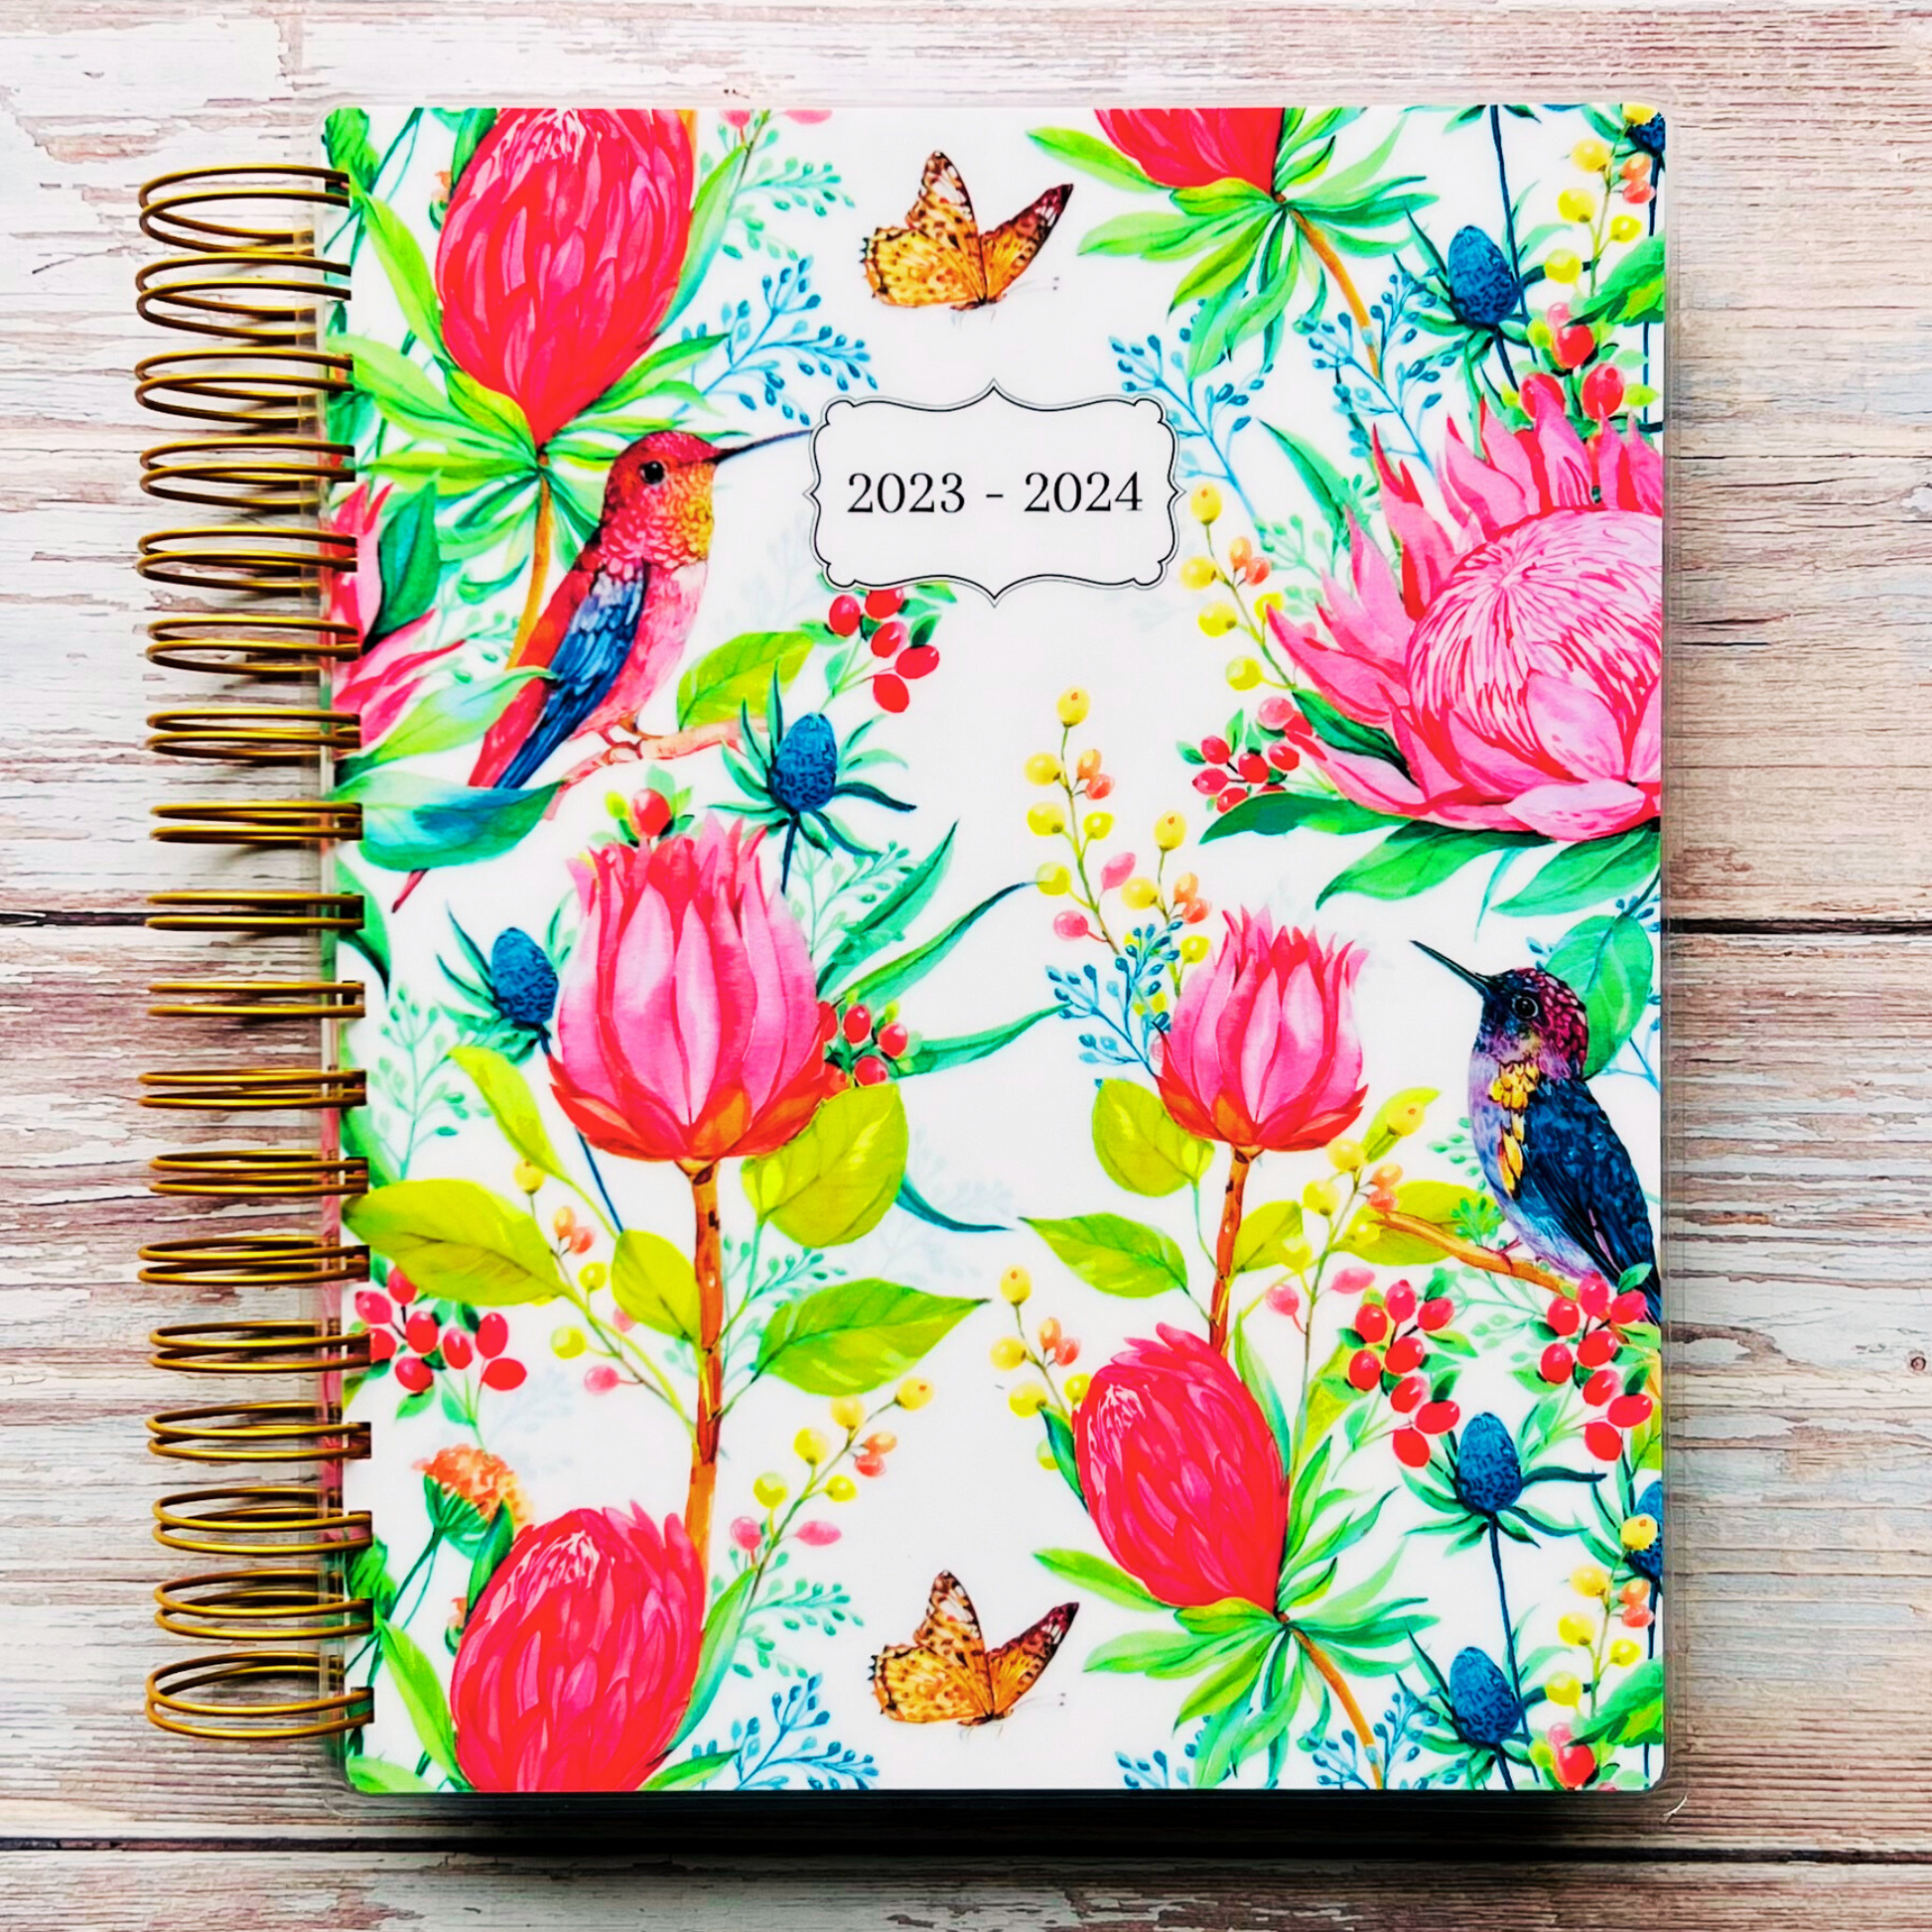 Personalized Weekly Planner 2023-2024 | Hummingbird Tropical Garden Weekly Planners Artful Planner Co. July-2023 Unlined Vertical 